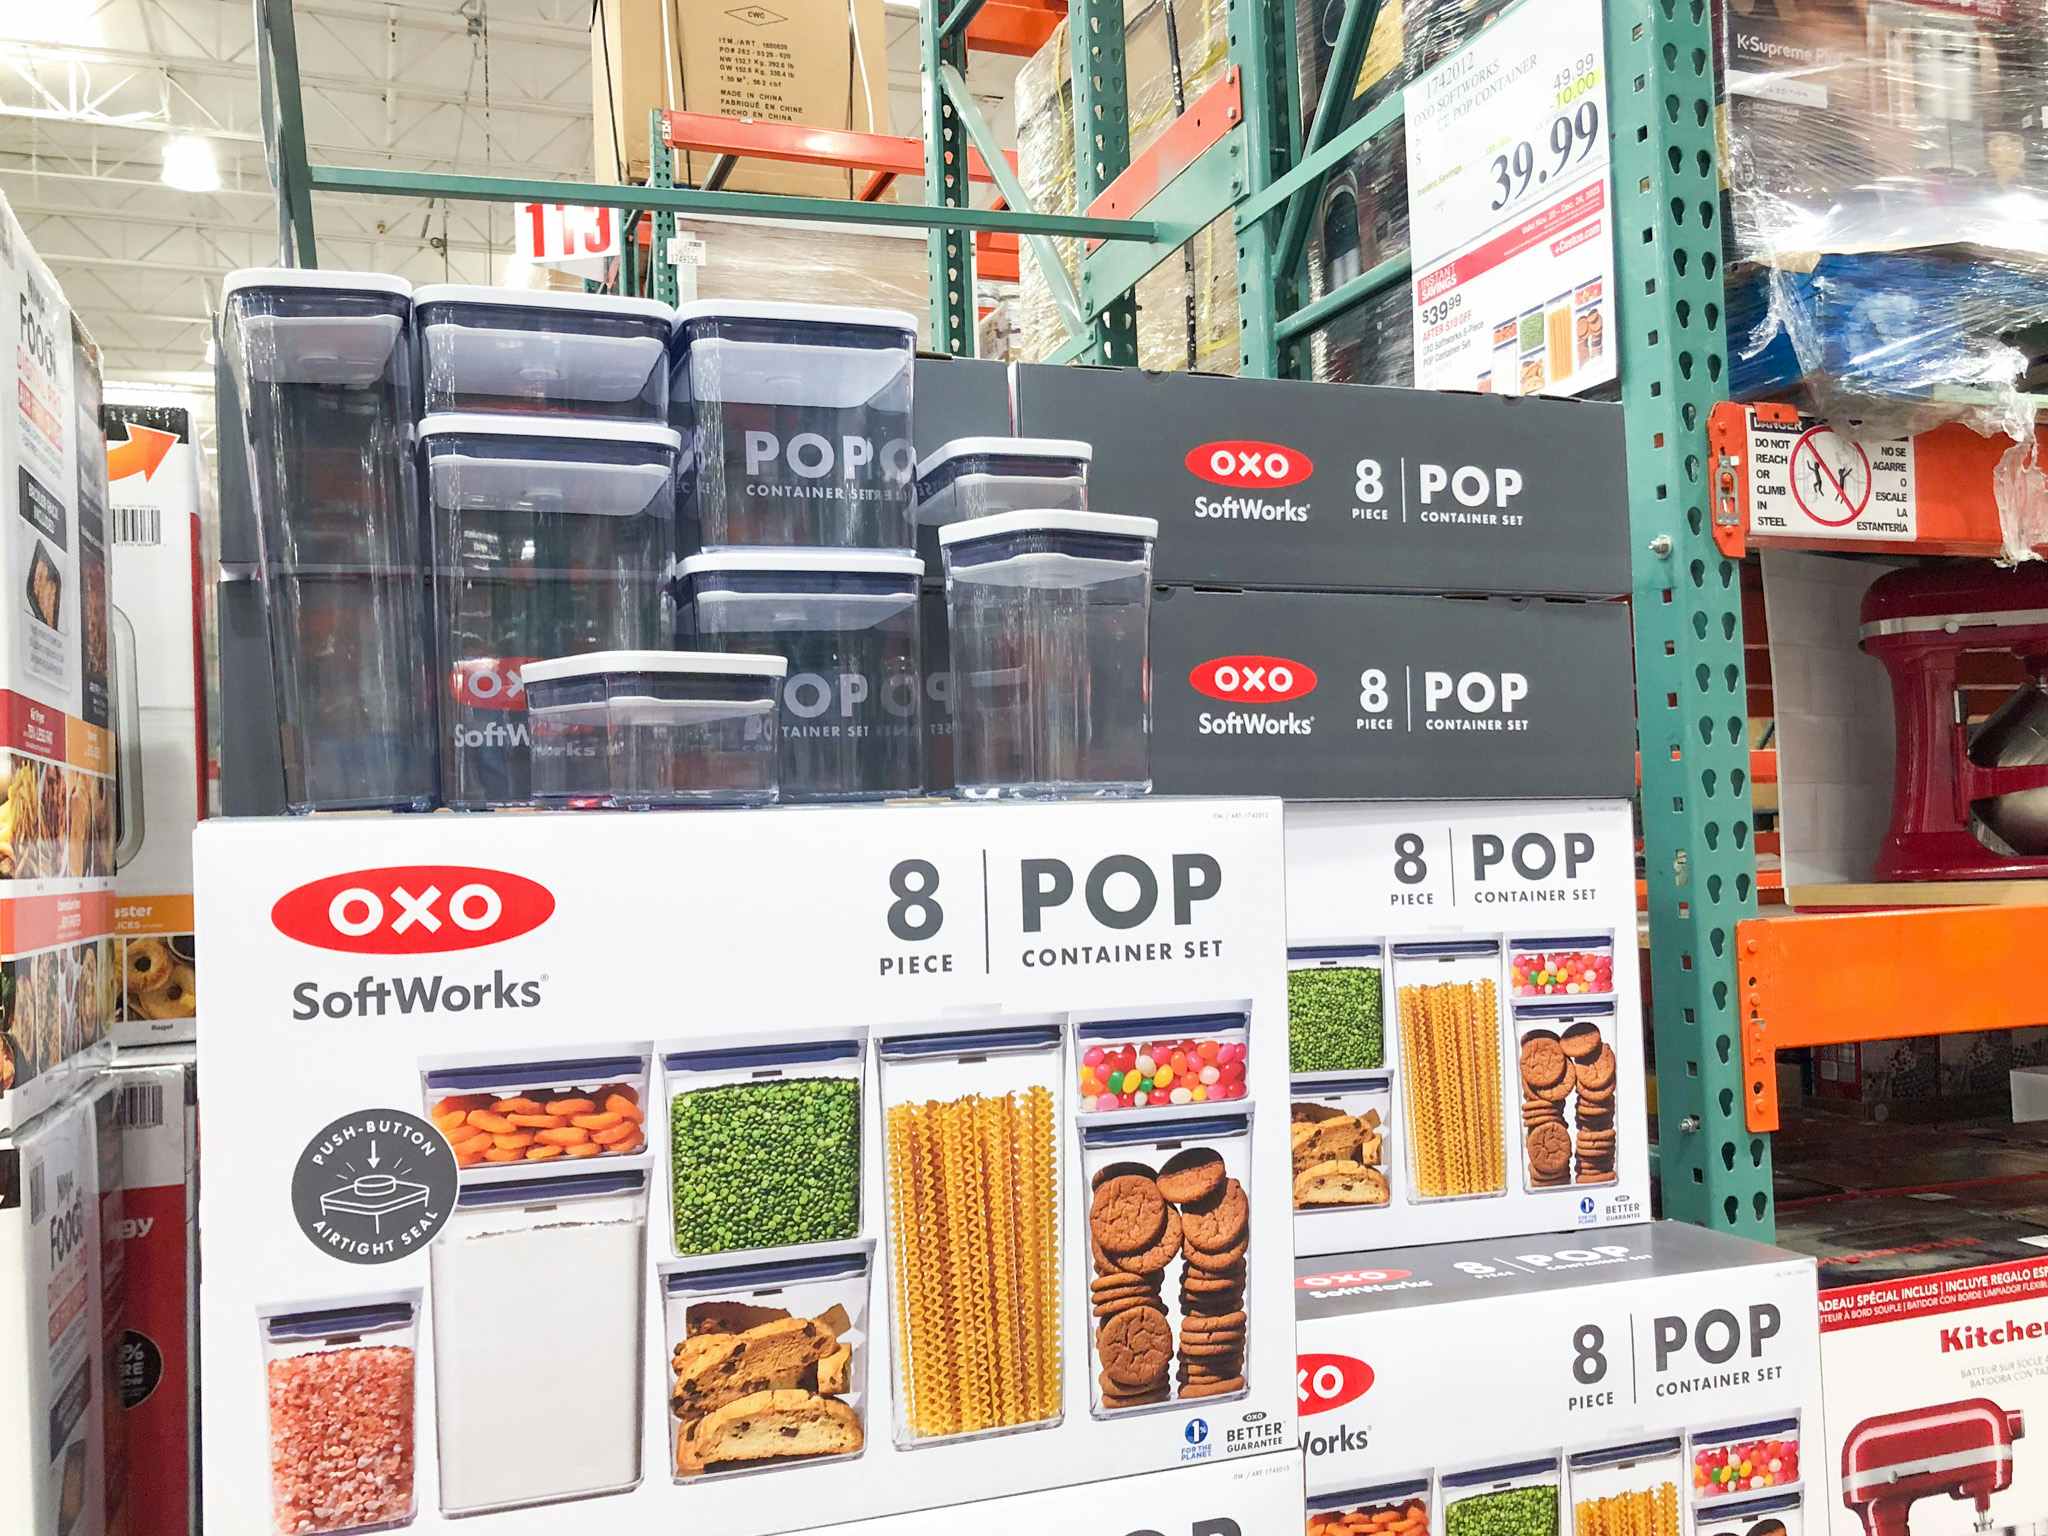 Costco Buys - Costco has this OXO Softworks 9-piece pop